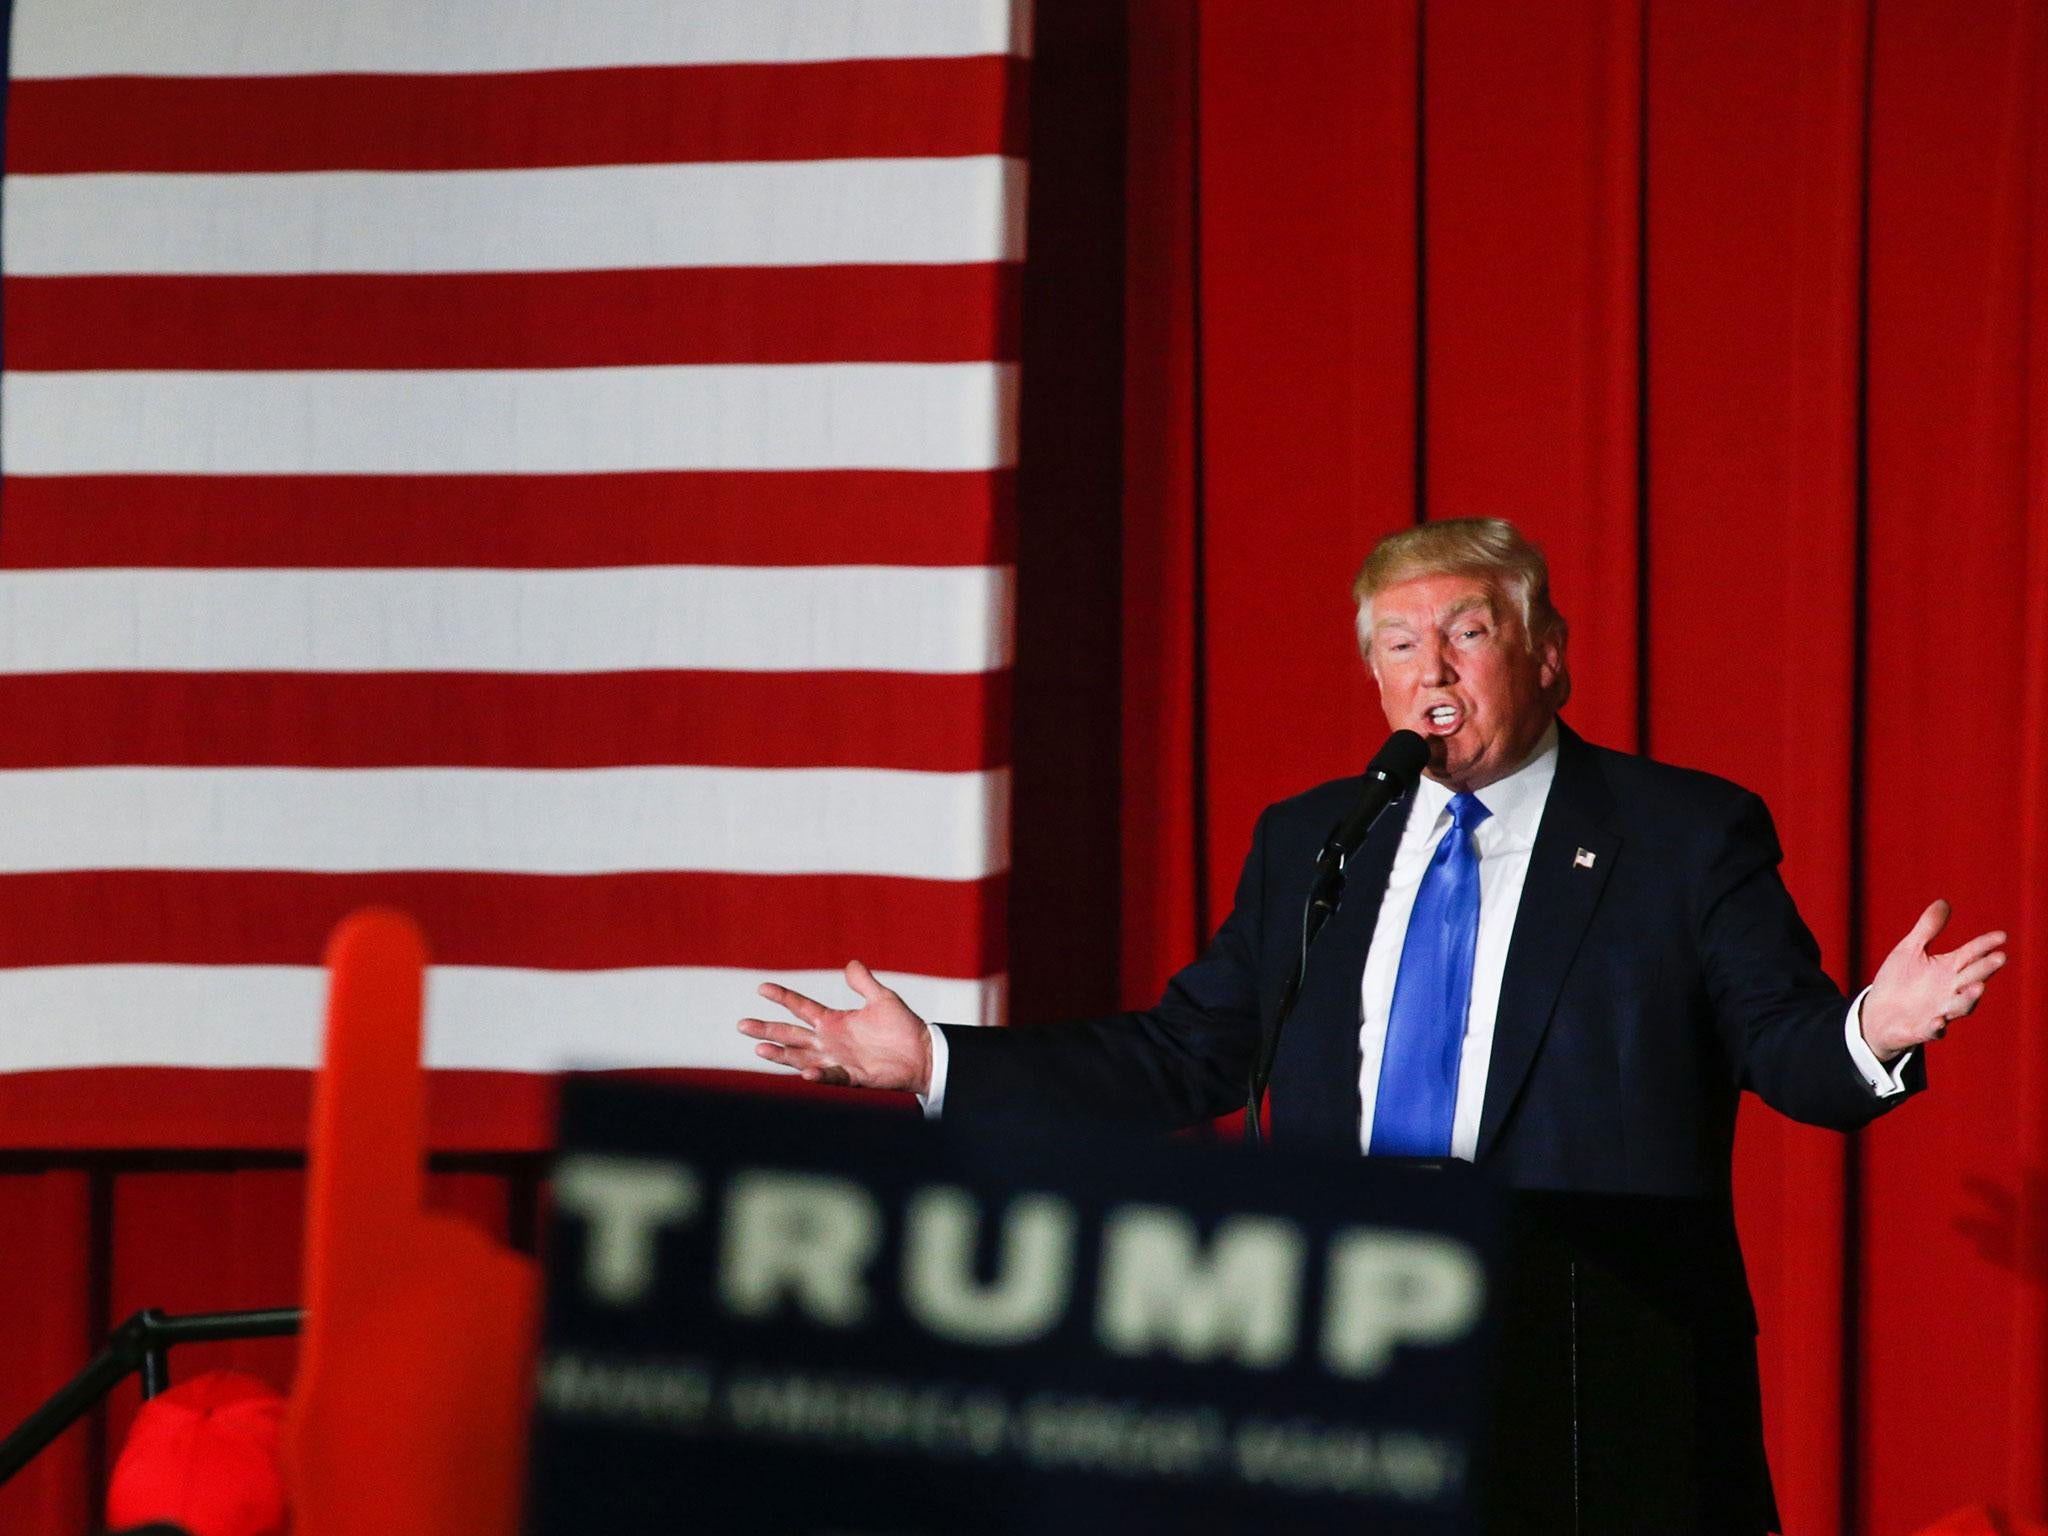 Donald Trump is the nominee presumptive for the Republican Party